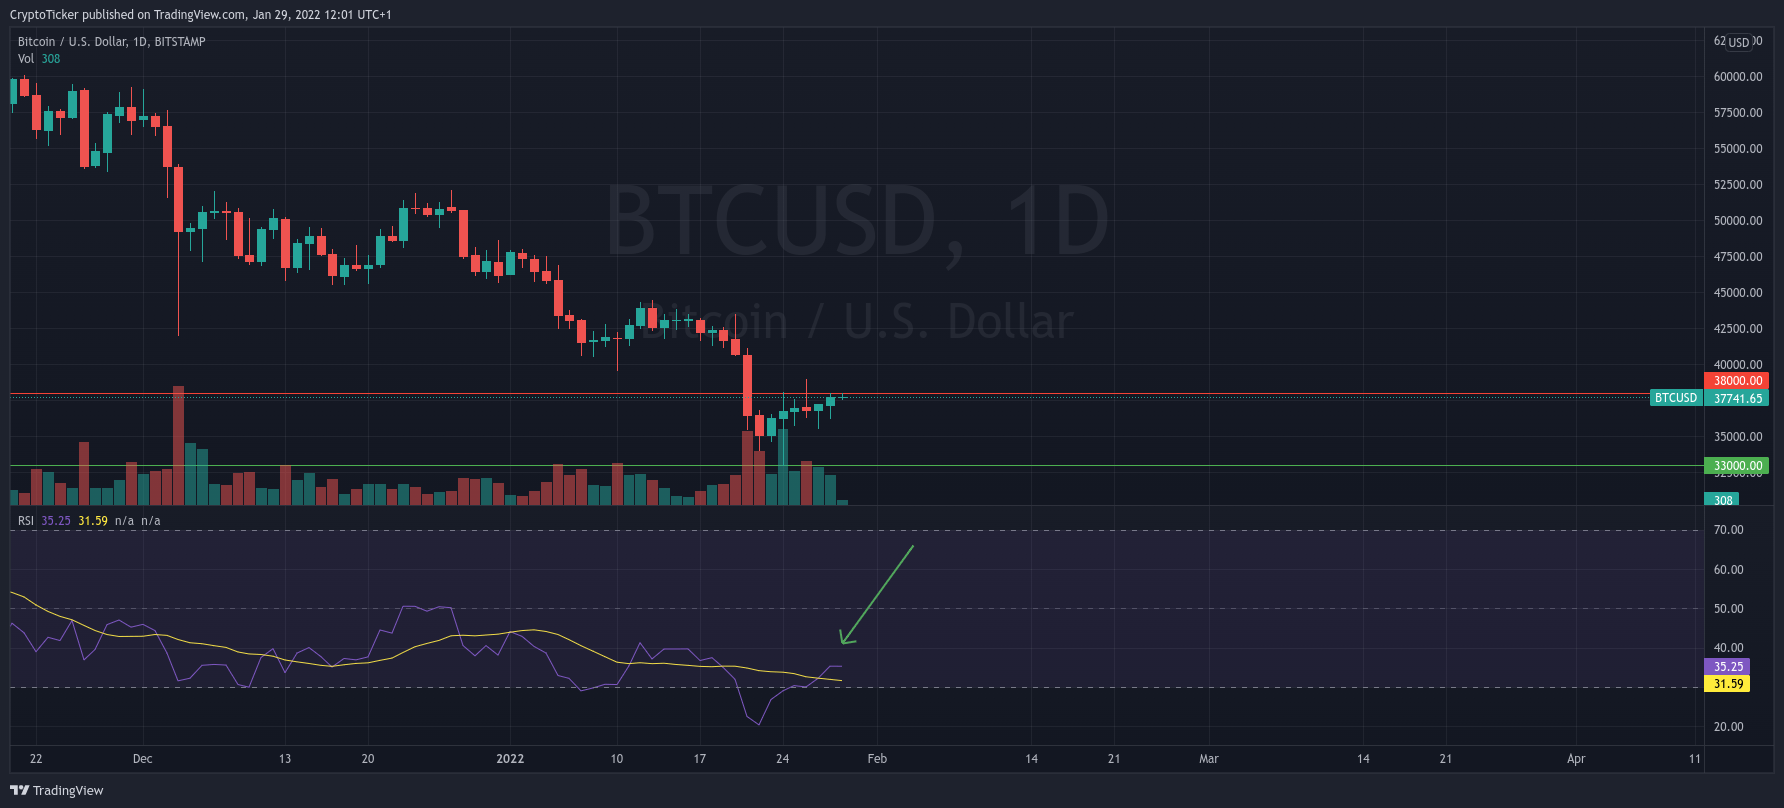 BTC/USD 1-day chart showing the oversold status of BTC